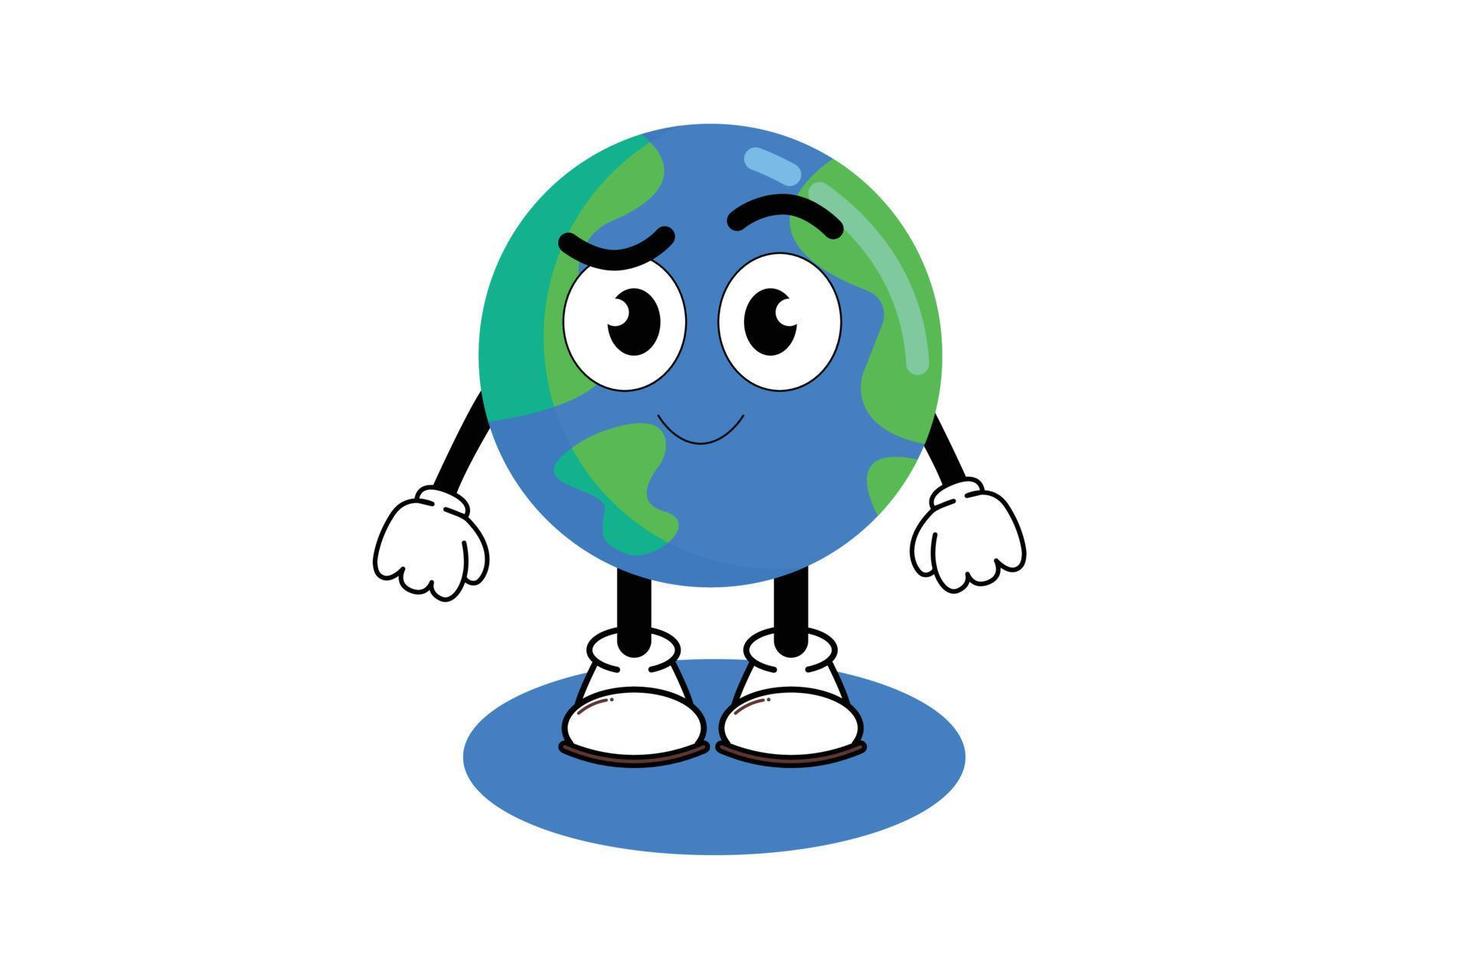 Illustration vector graphic cartoon character of cute mascot earth with pose. Suitable for children book illustration and element design.